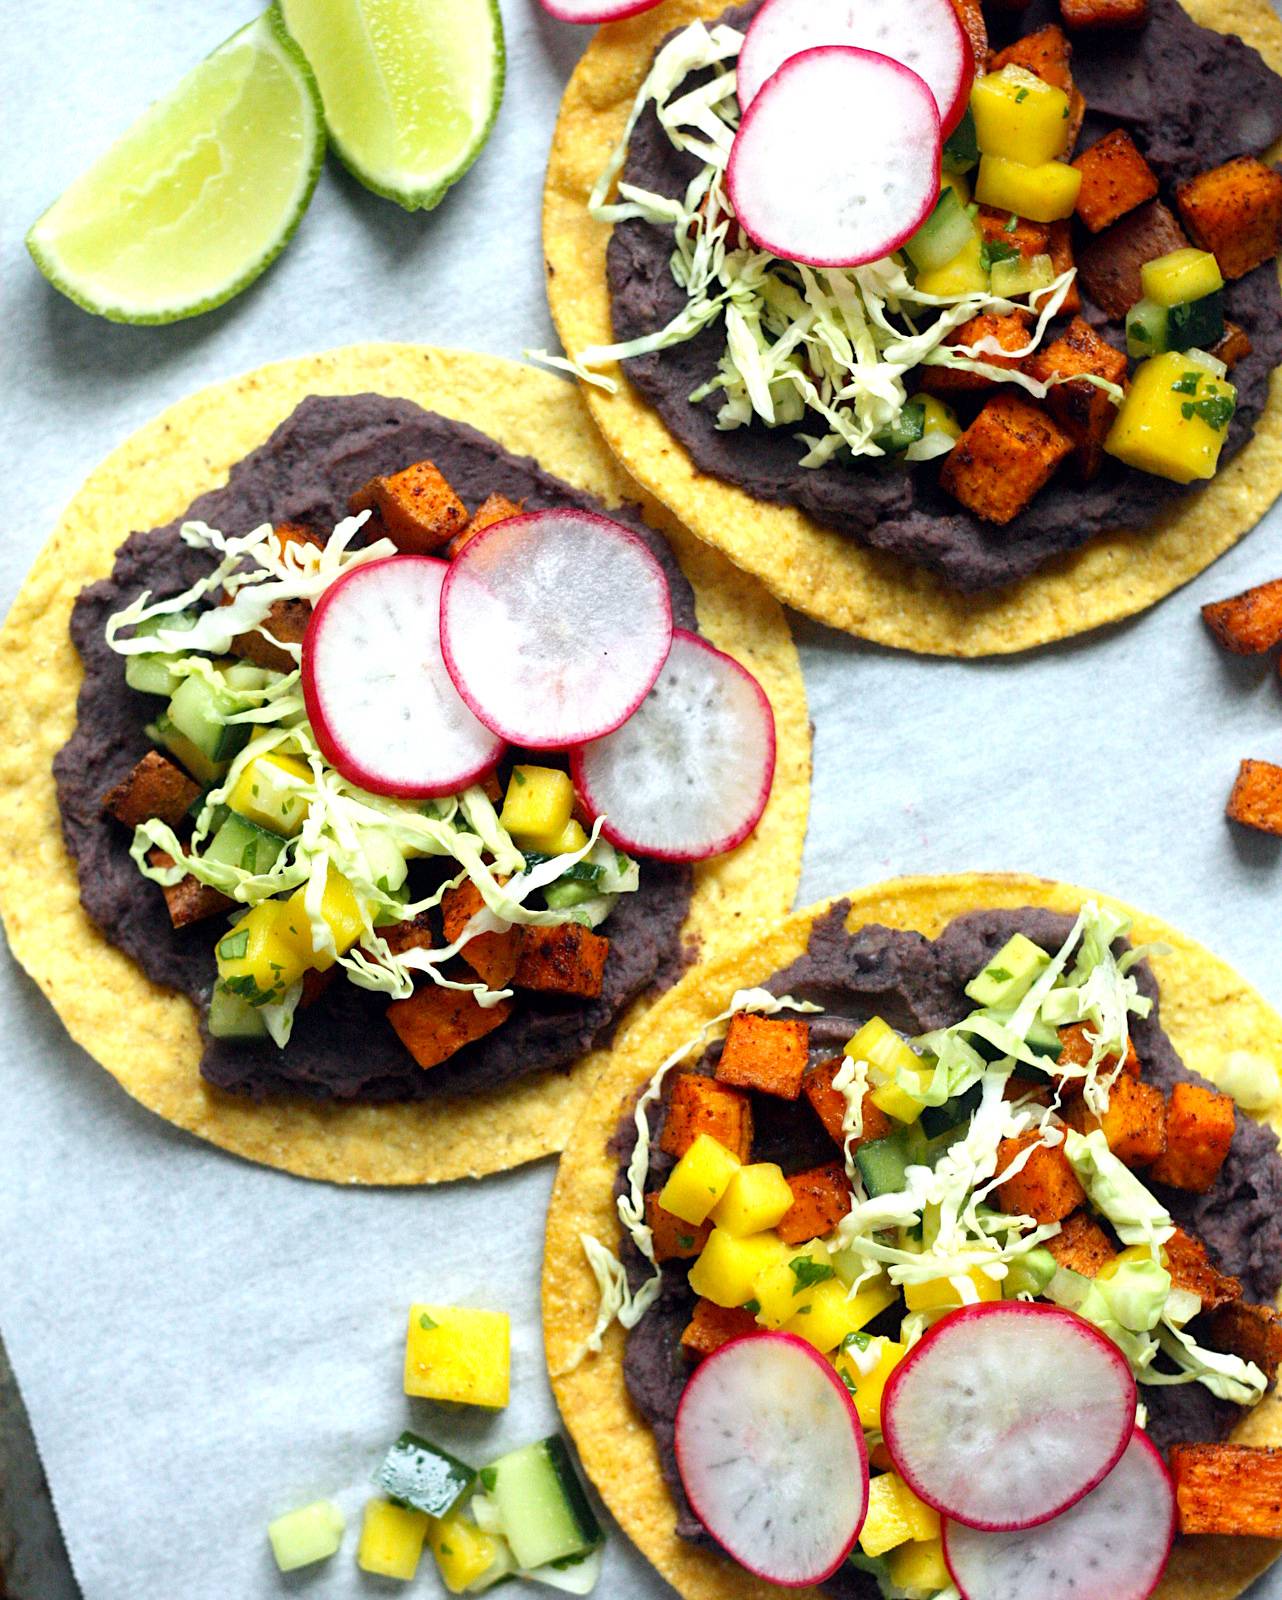 Tostadas topped with refried black beans, roasted sweet potatoes and mango salsa